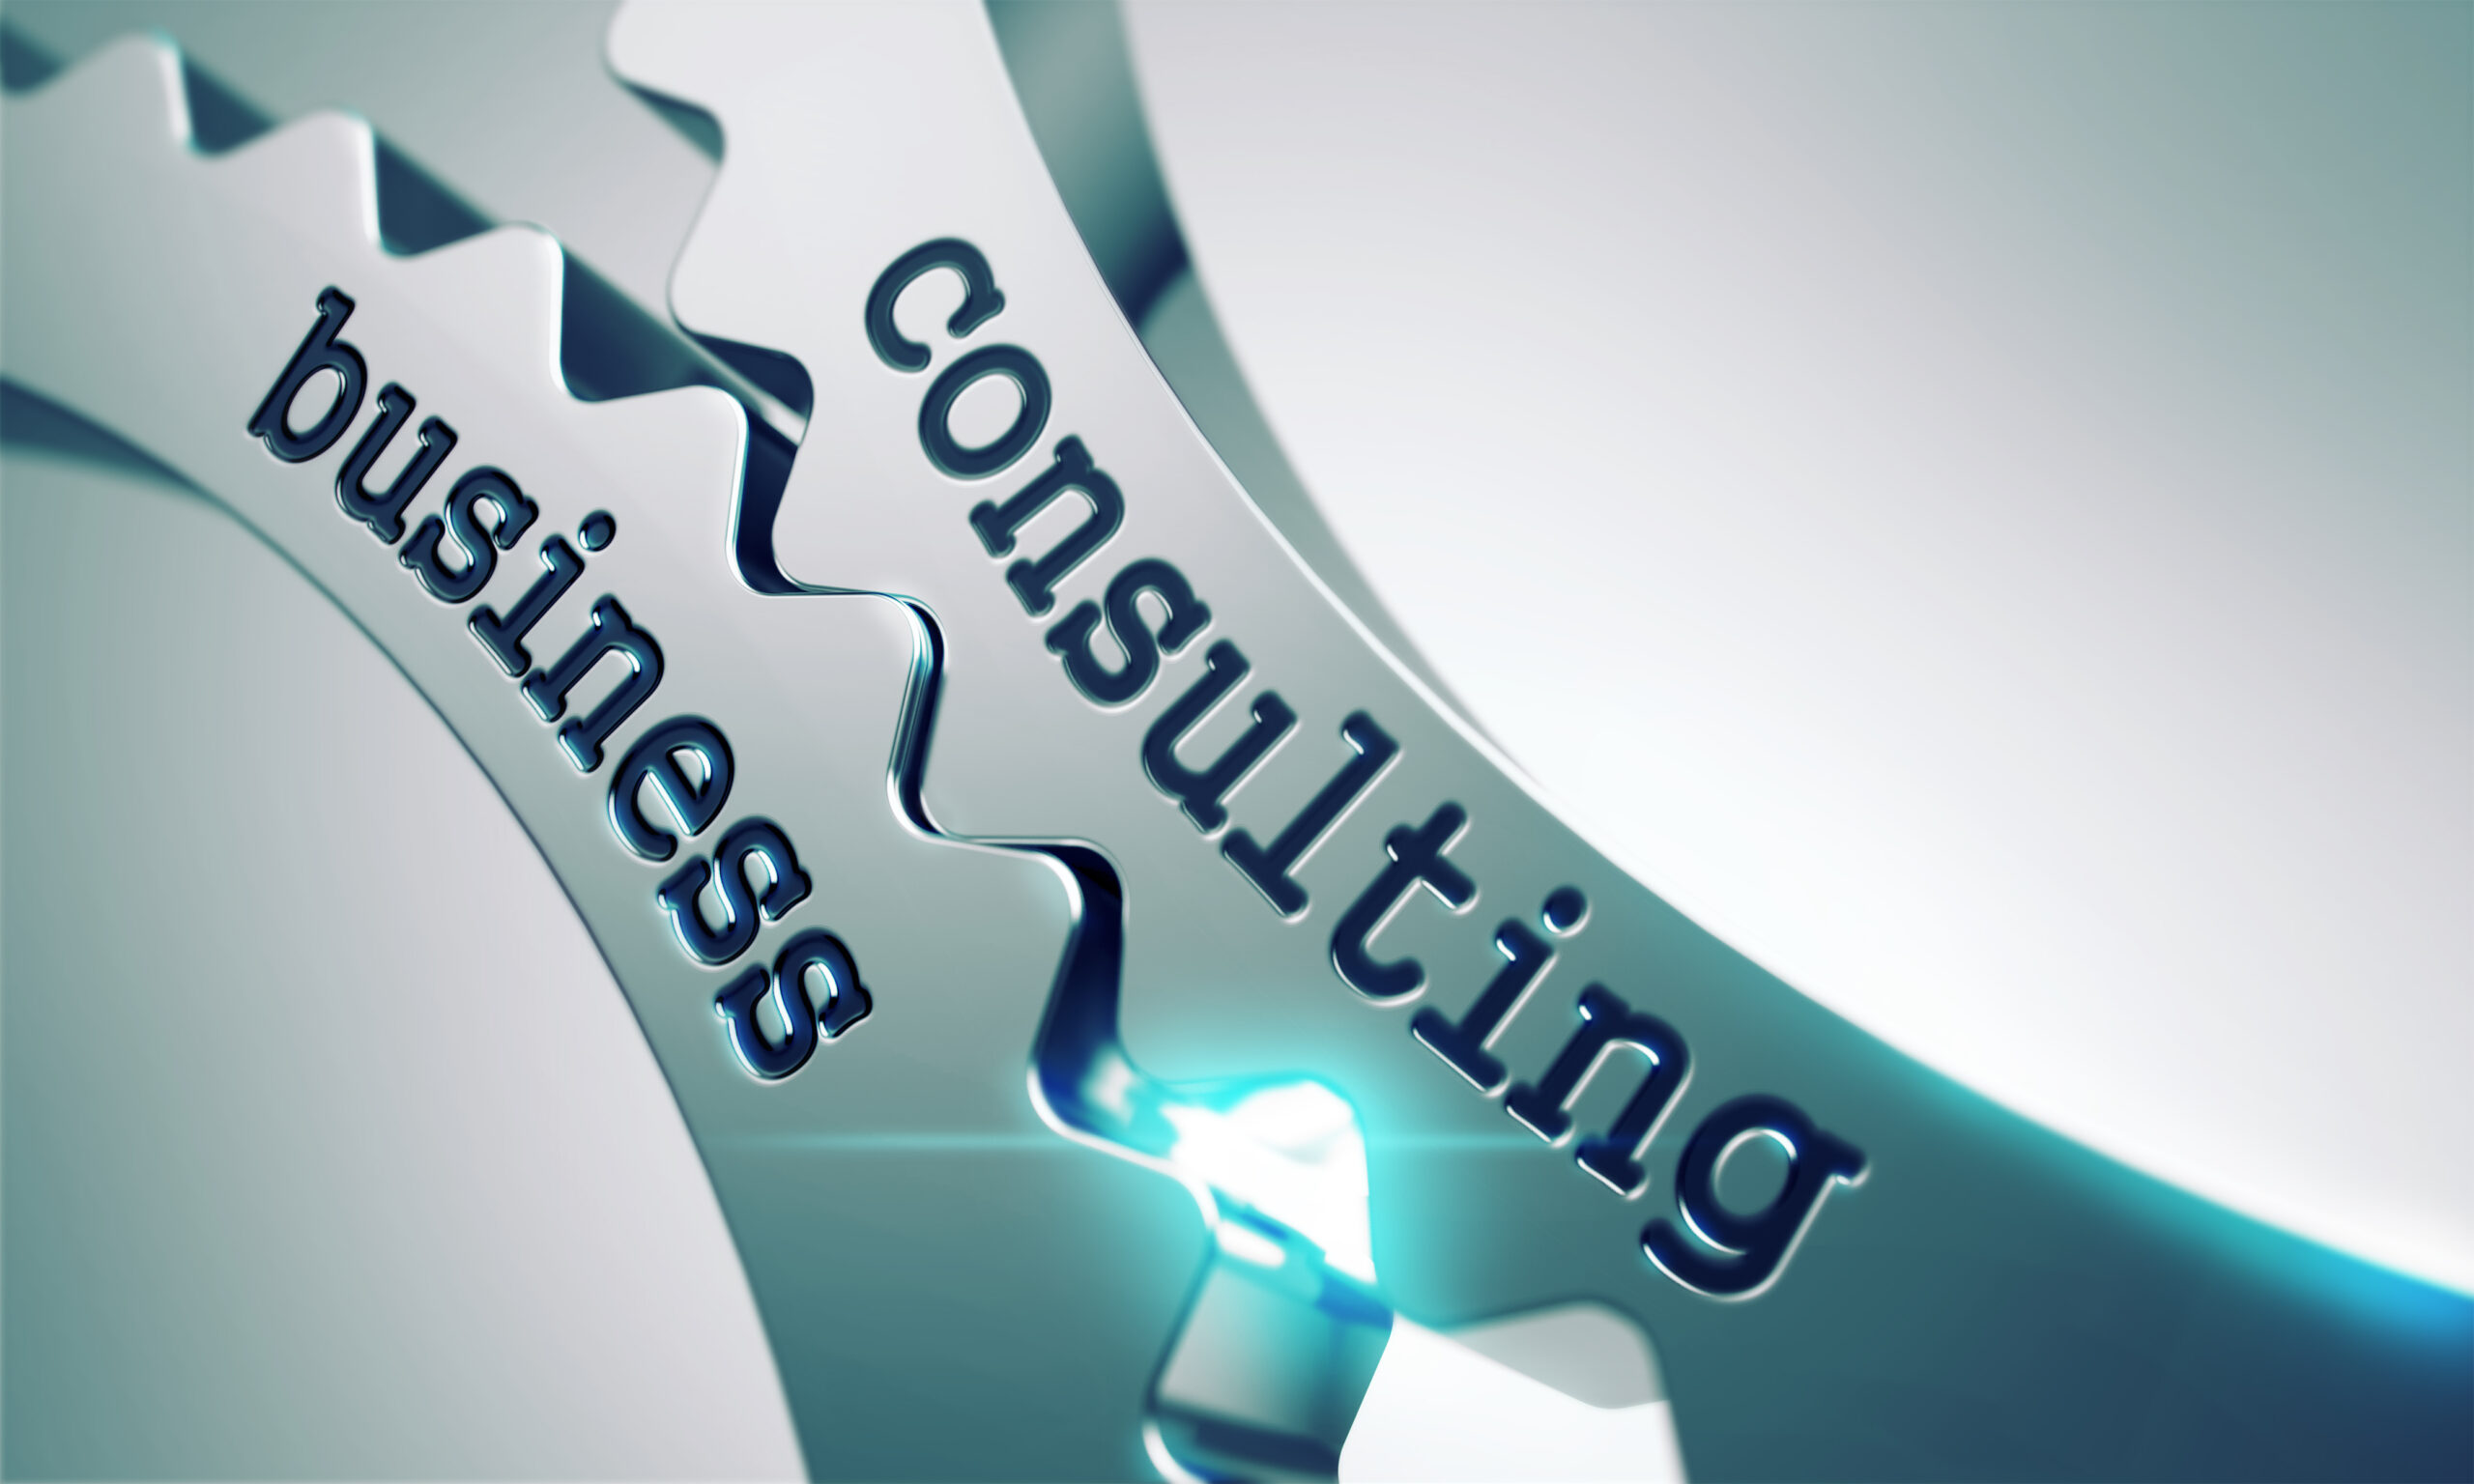 Consulting Services